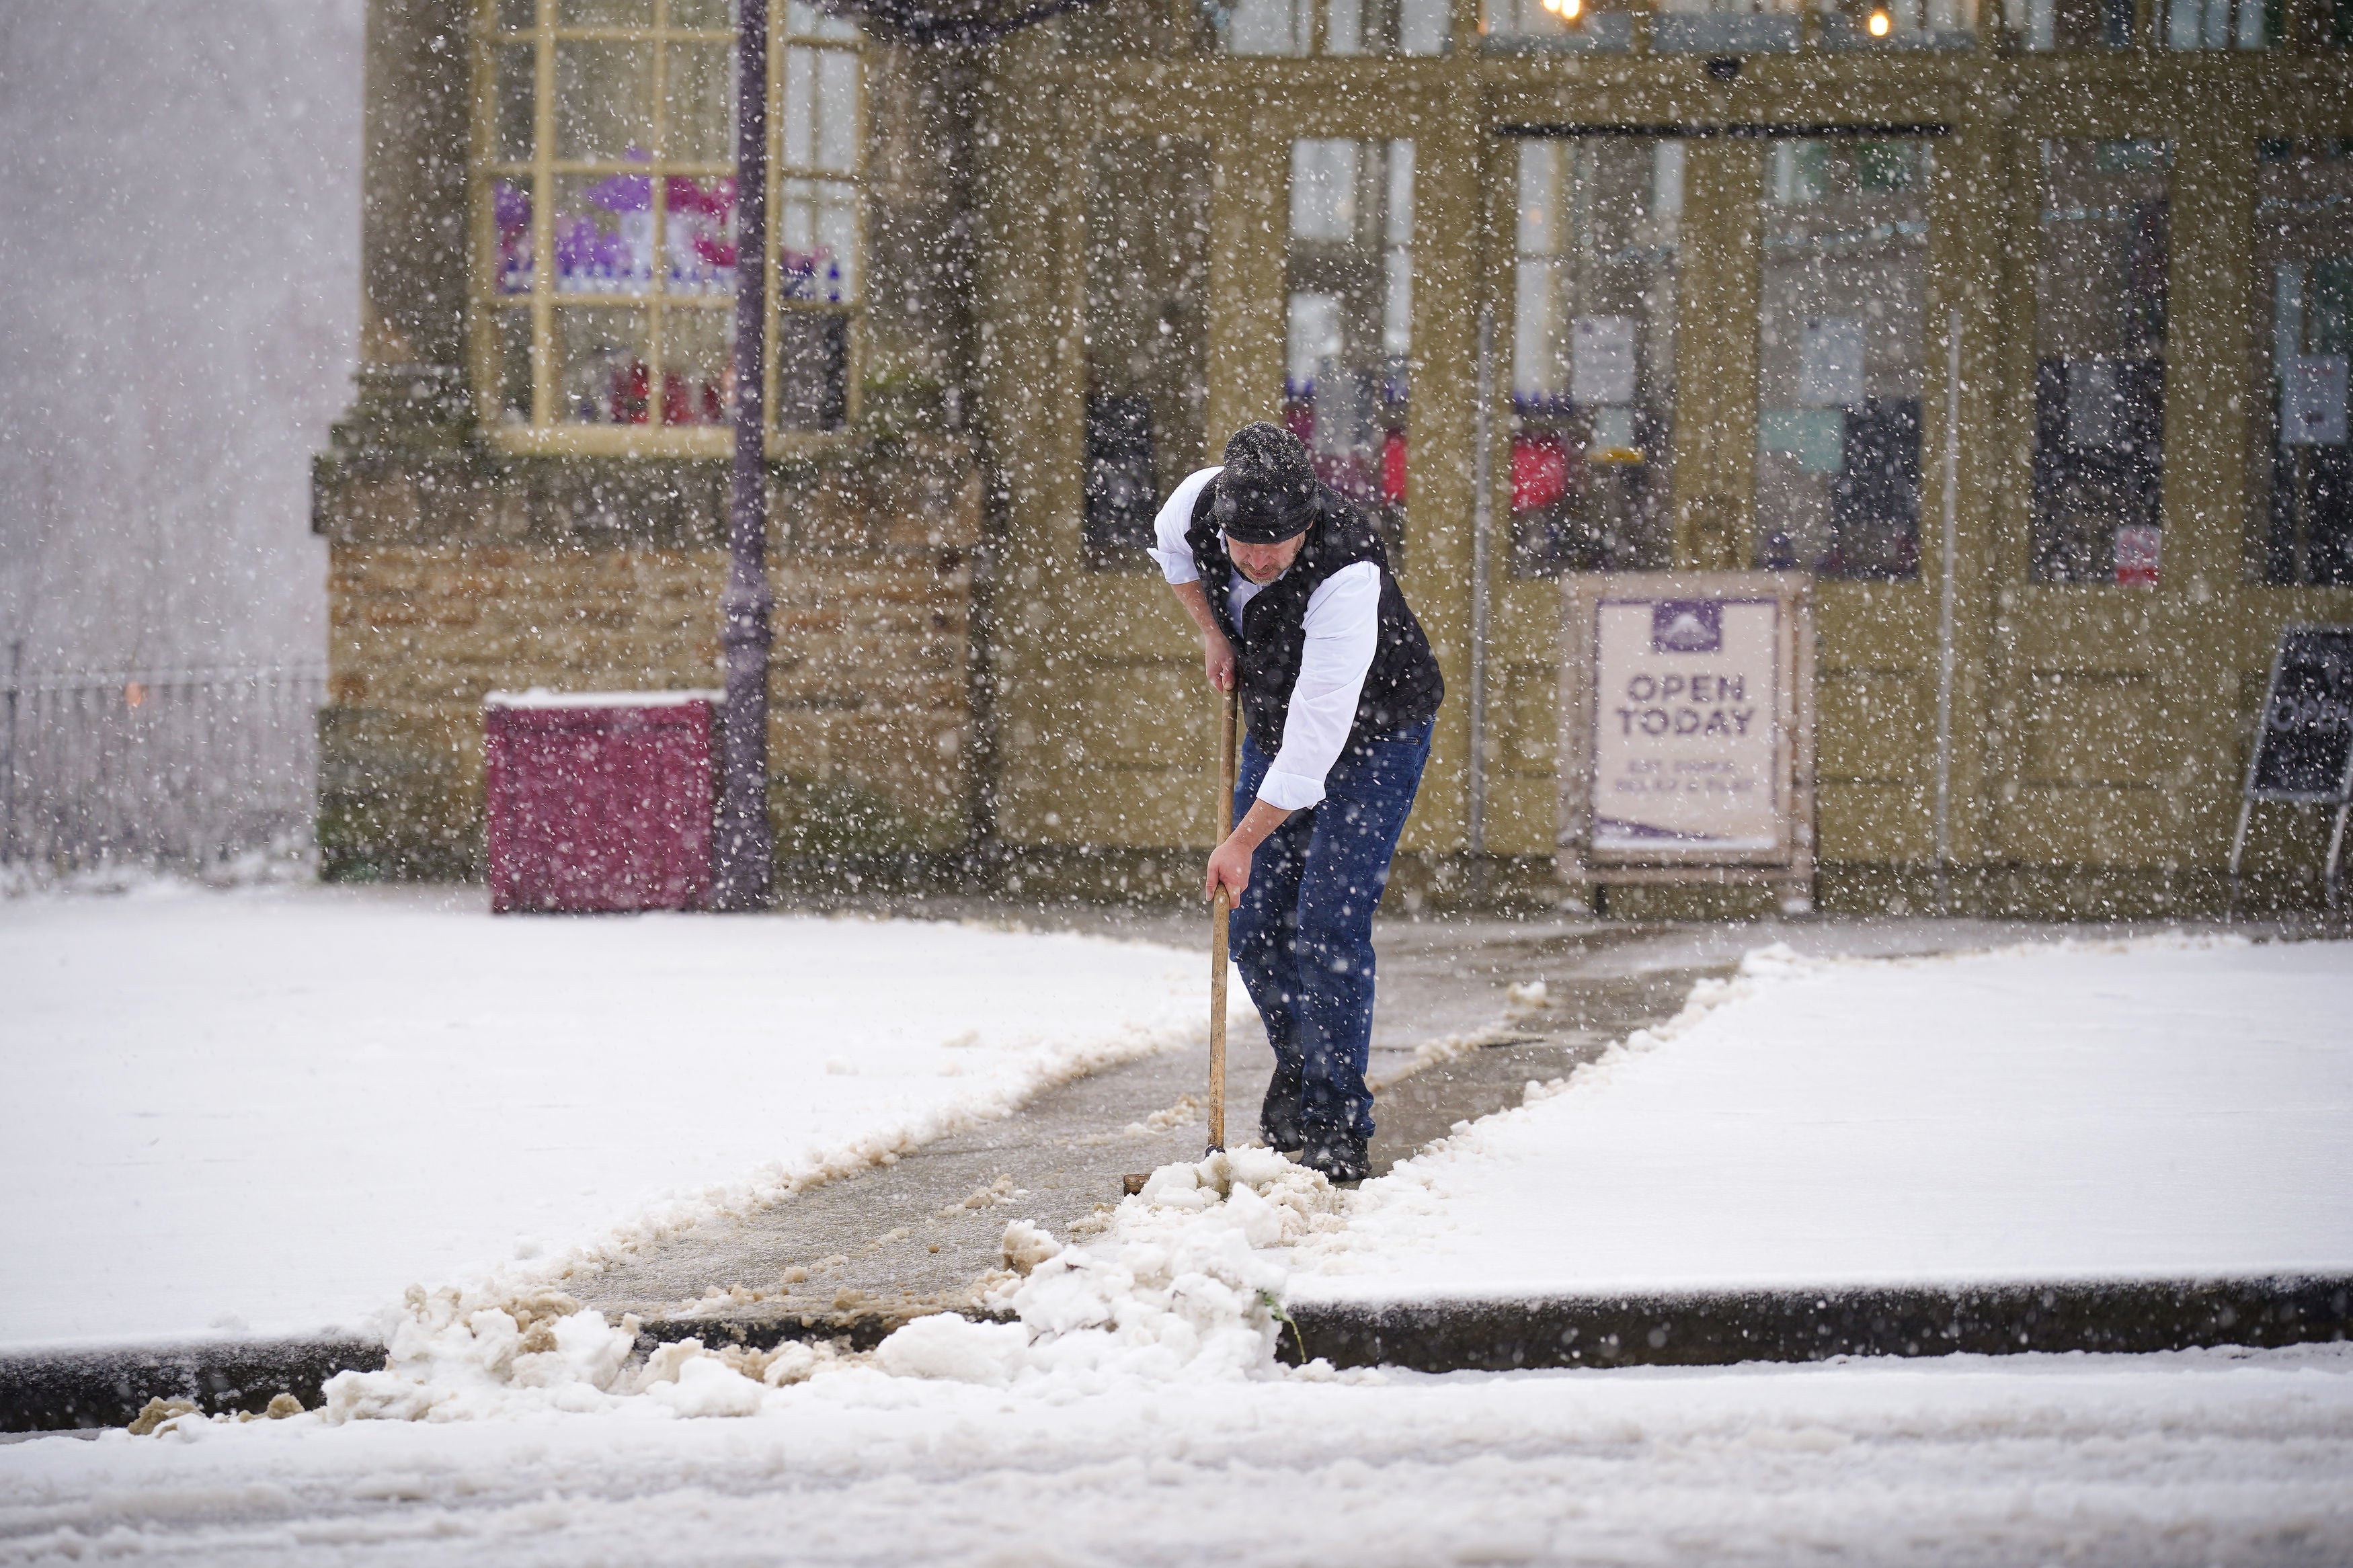 A person clears snow in front of the Opera House in Buxton, Peak District.